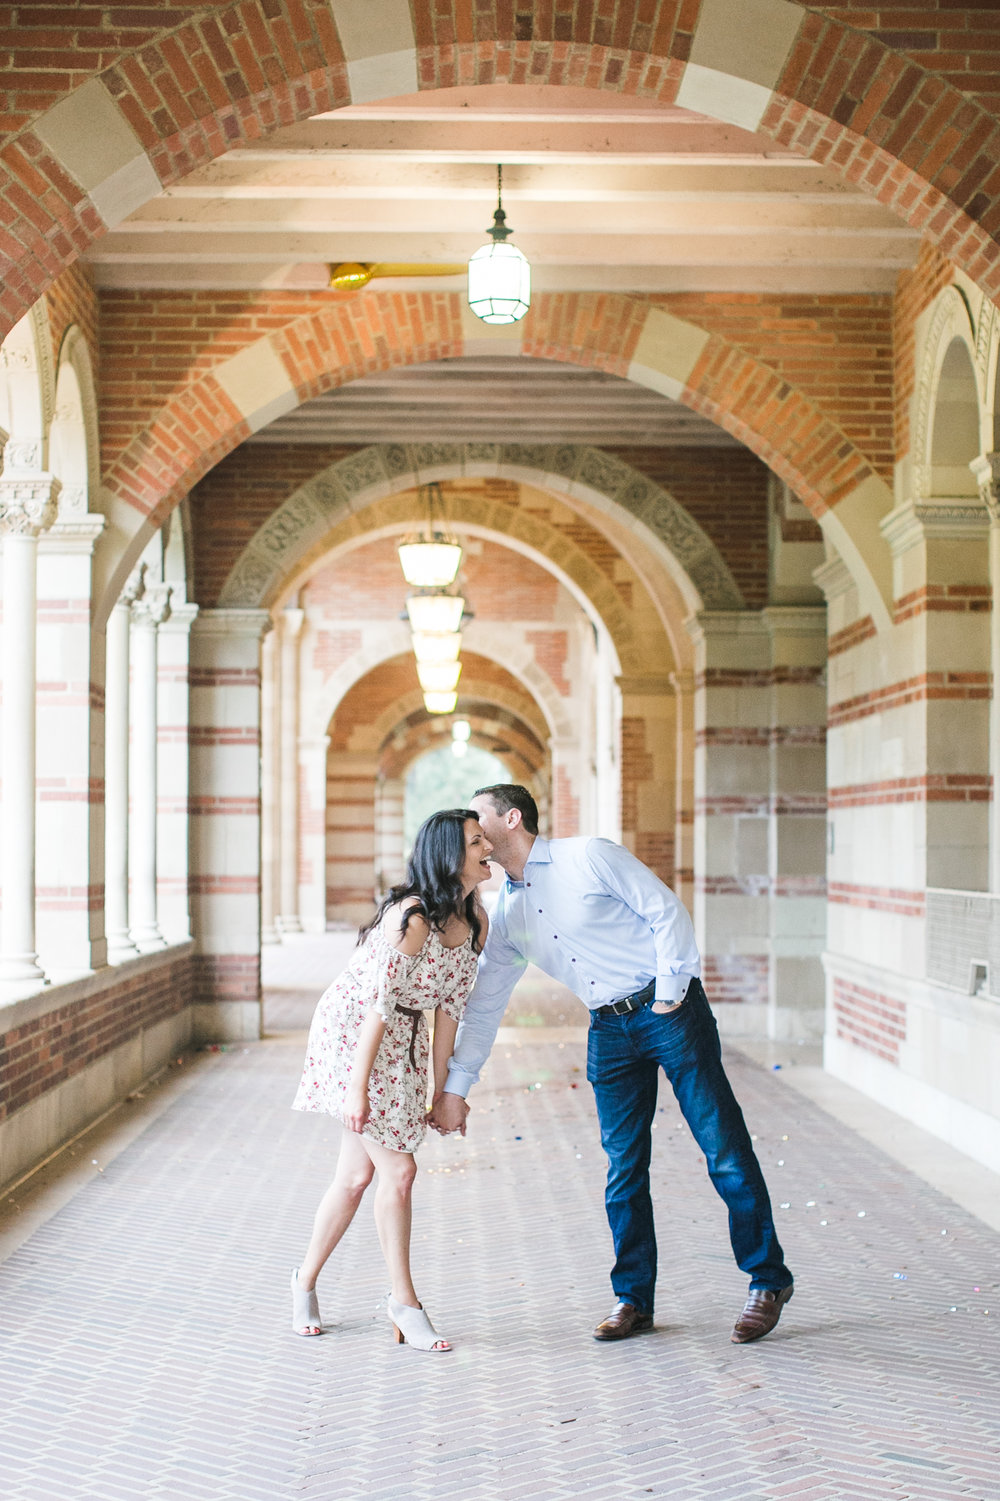 Jamie and I knew each other back during our college days so this engagement photoshoot was dear to my heart.